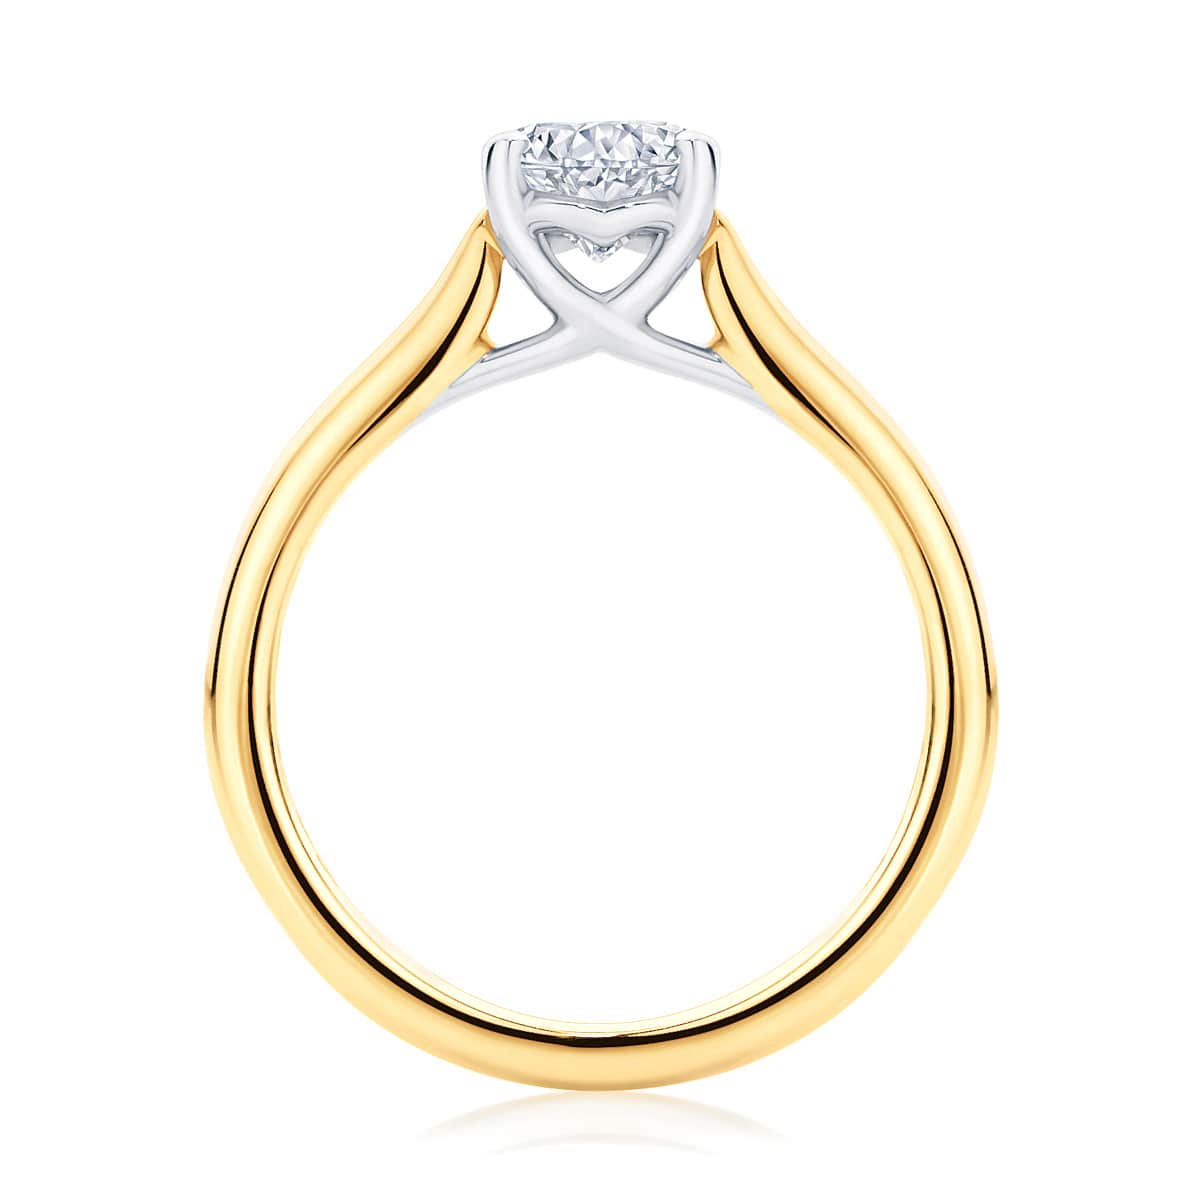 Pear cut diamond engagement ring yellow gold solitaire